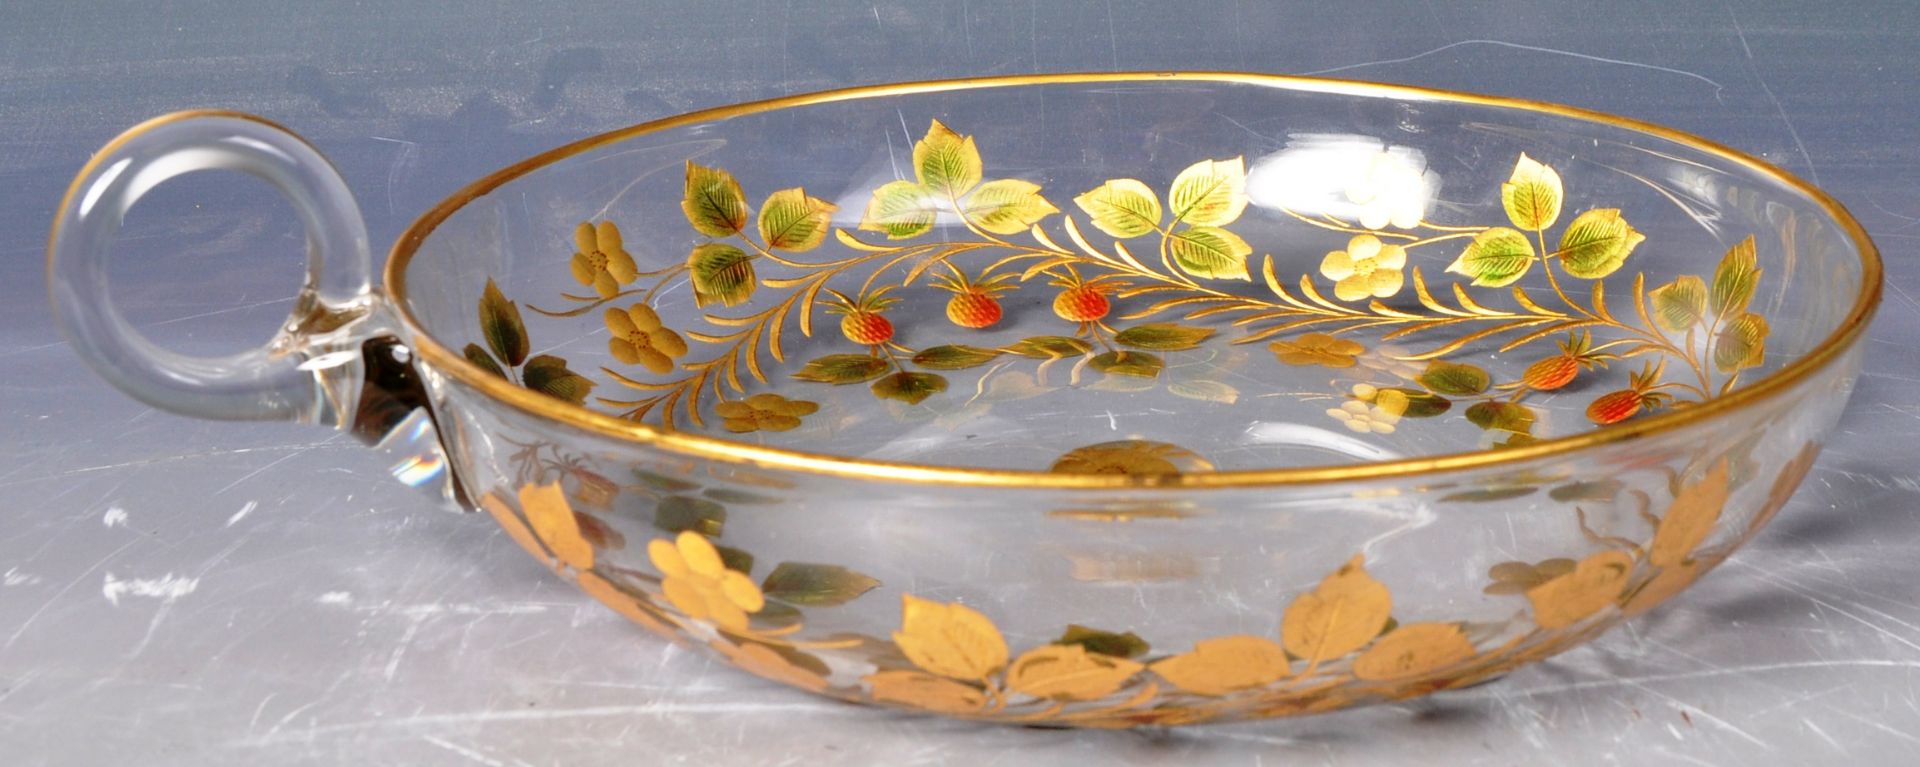 EARLY 20TH CENTURY FRENCH GILDED STRAWBERRY SET - Image 6 of 7